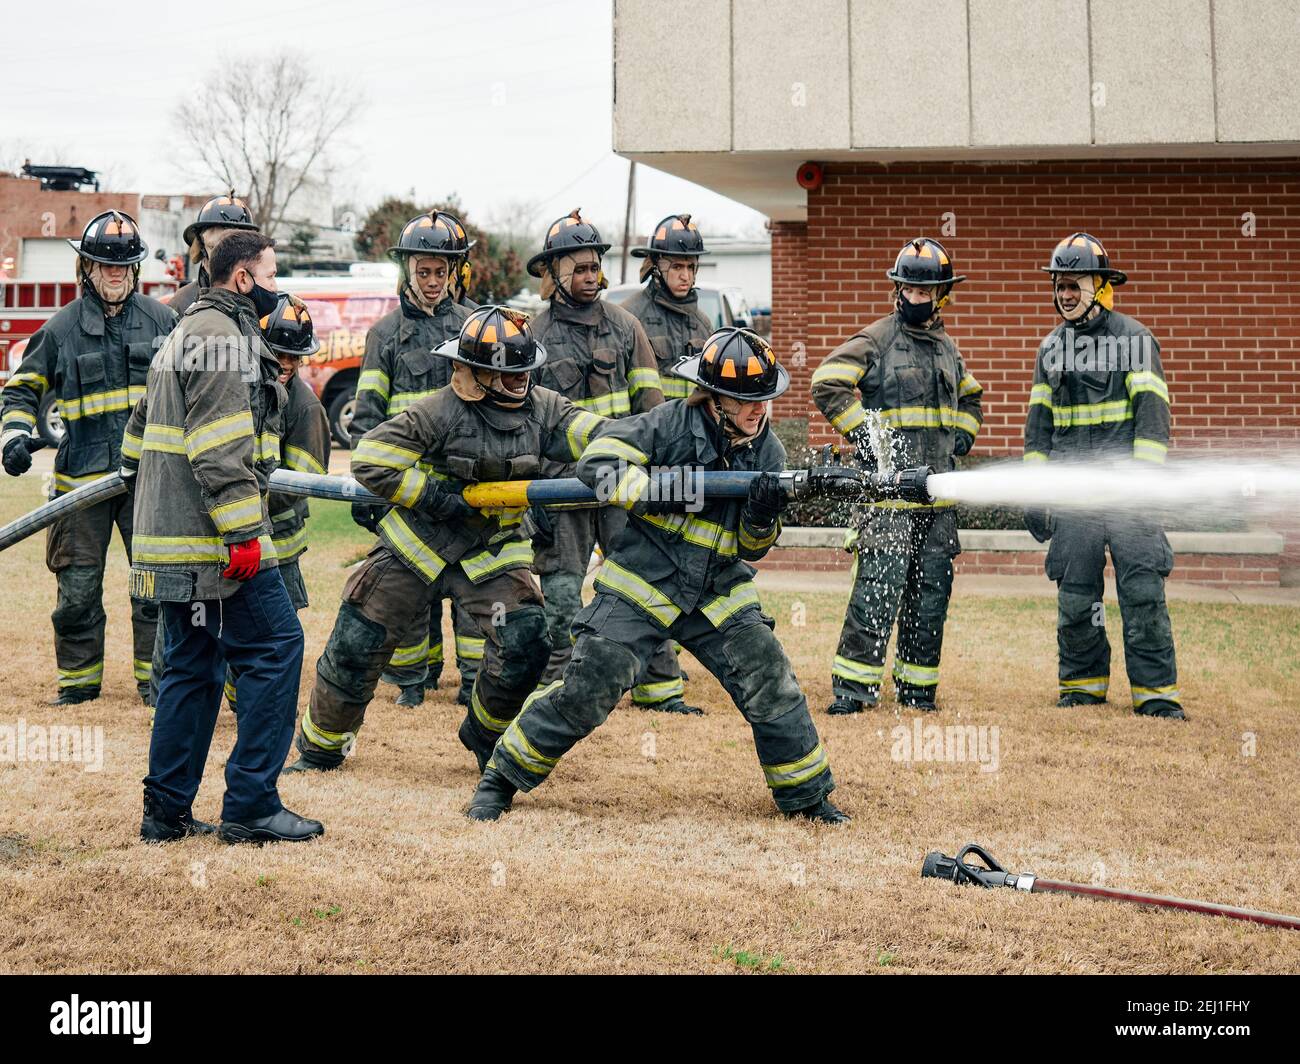 Firefighter trainees going through firefighter training with fire hoses at the fire academy in Montgomery Alabama, USA. Stock Photo